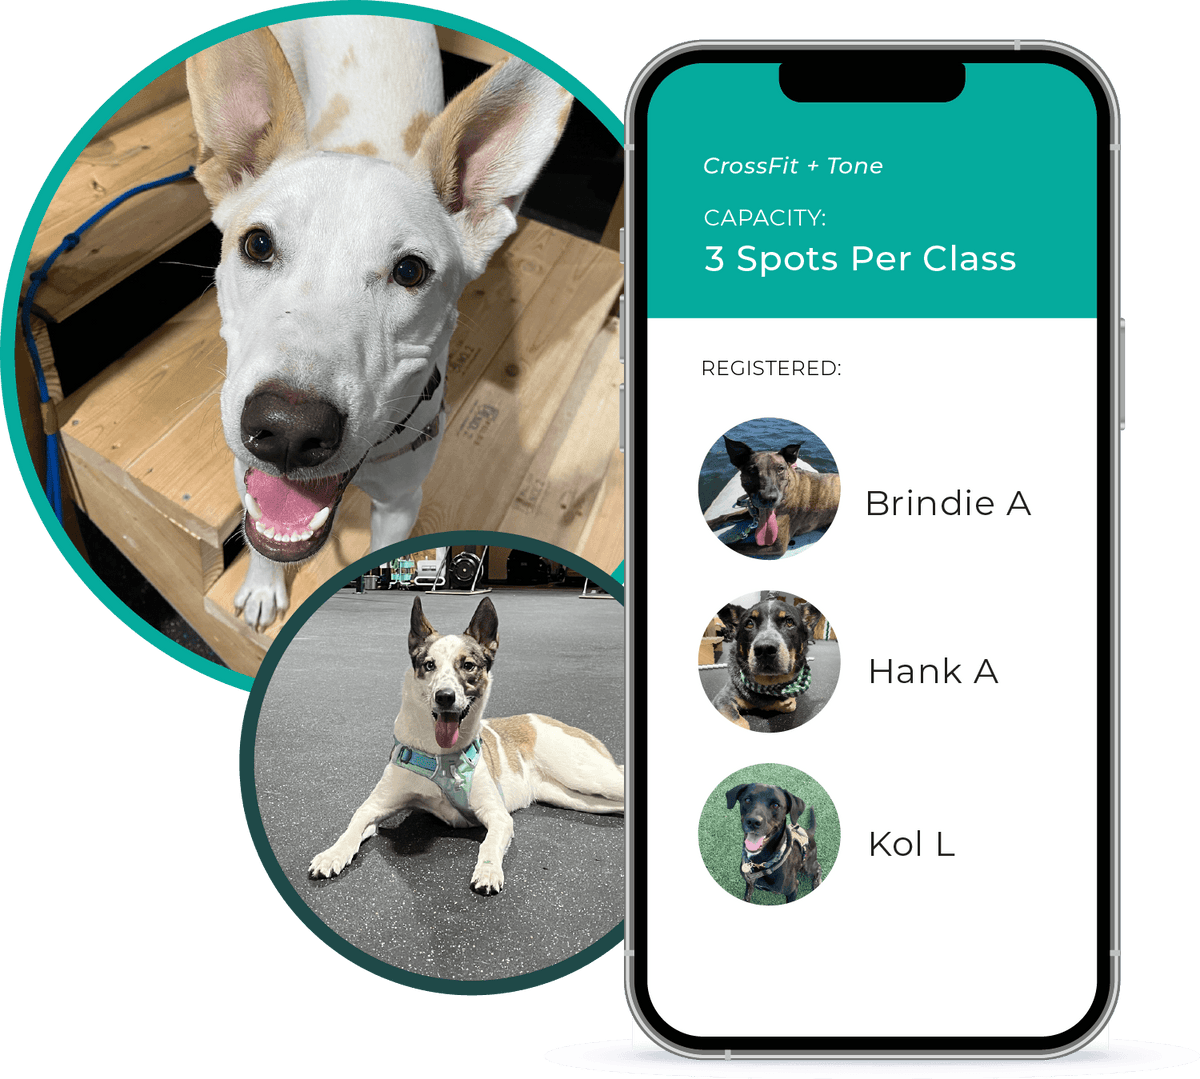 Dogs signed up for class in app